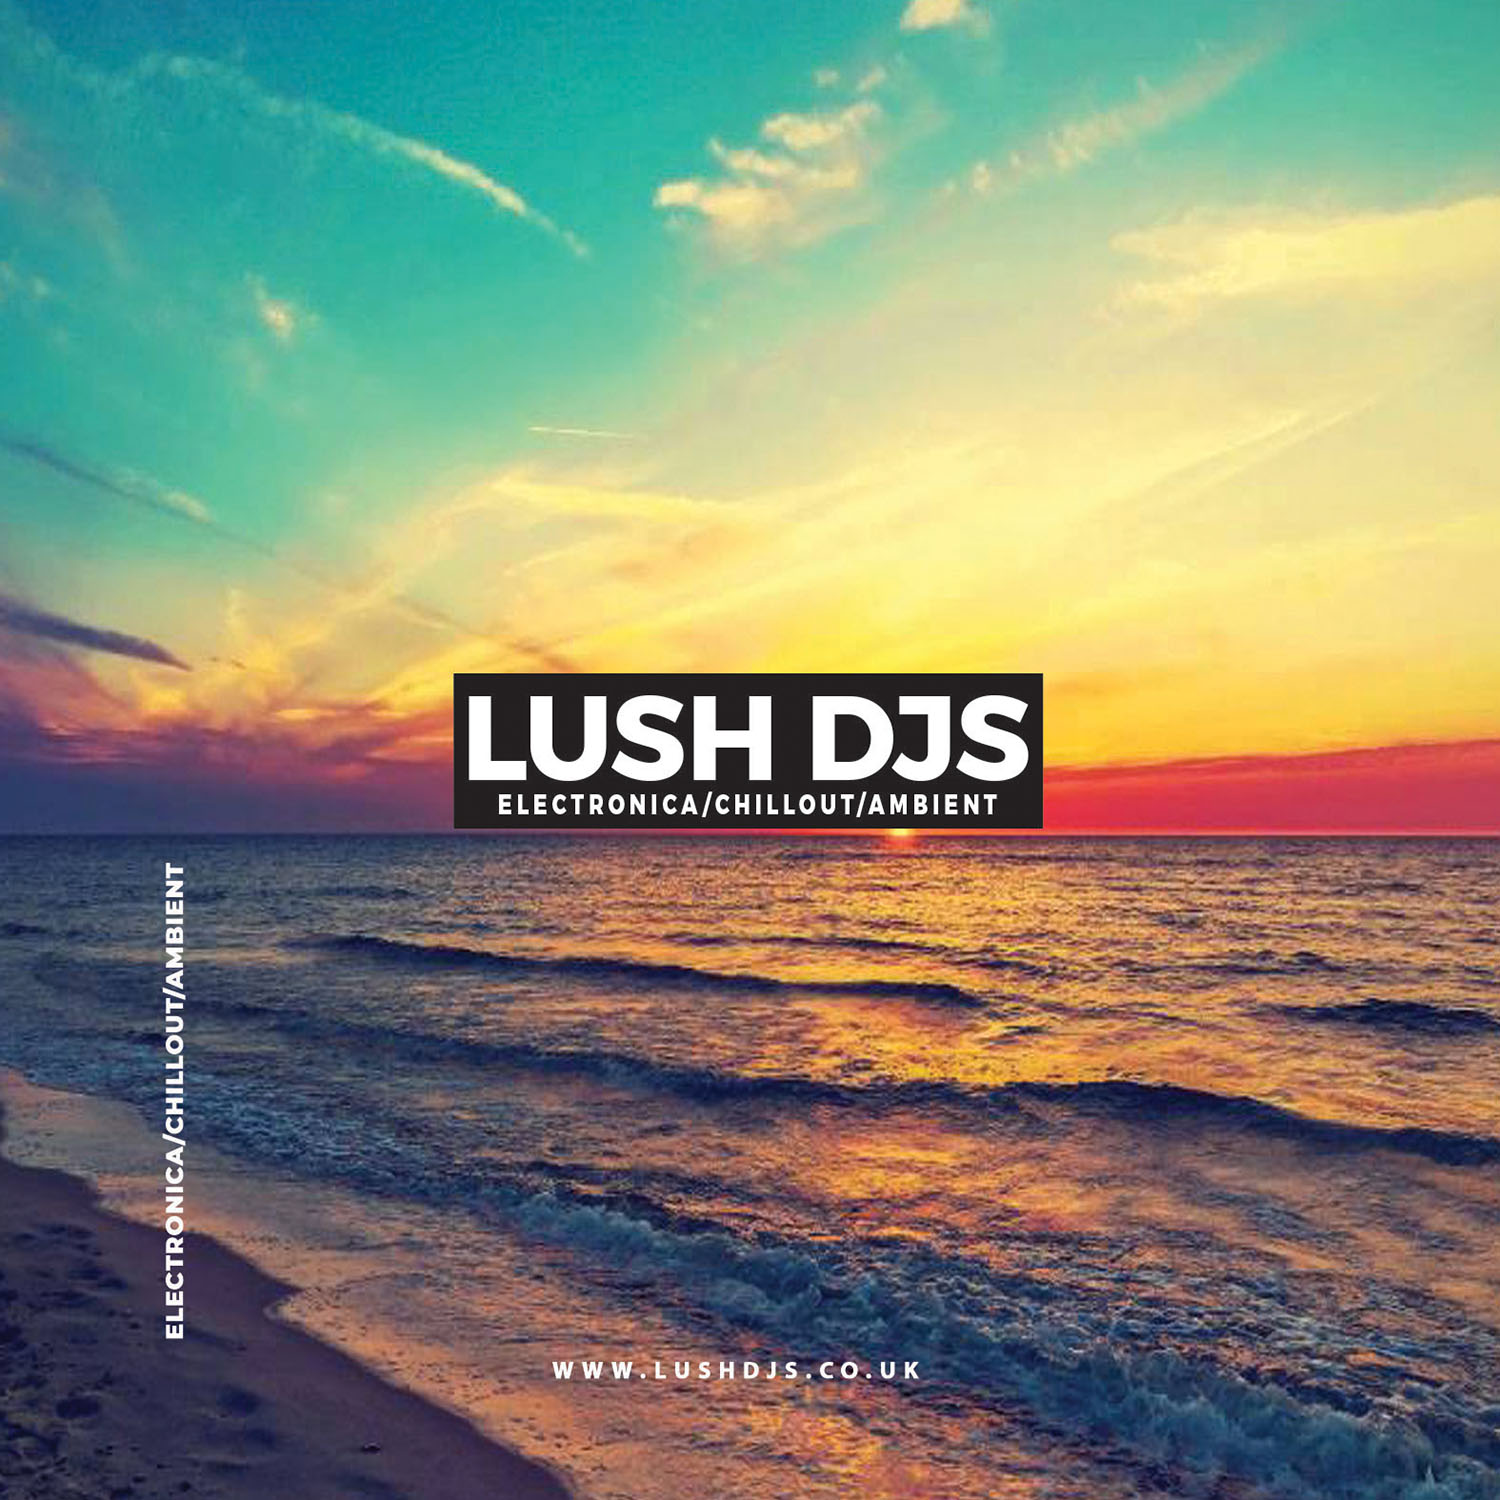 Artwork for Lush DJs - Electronica/Chillout/Ambient